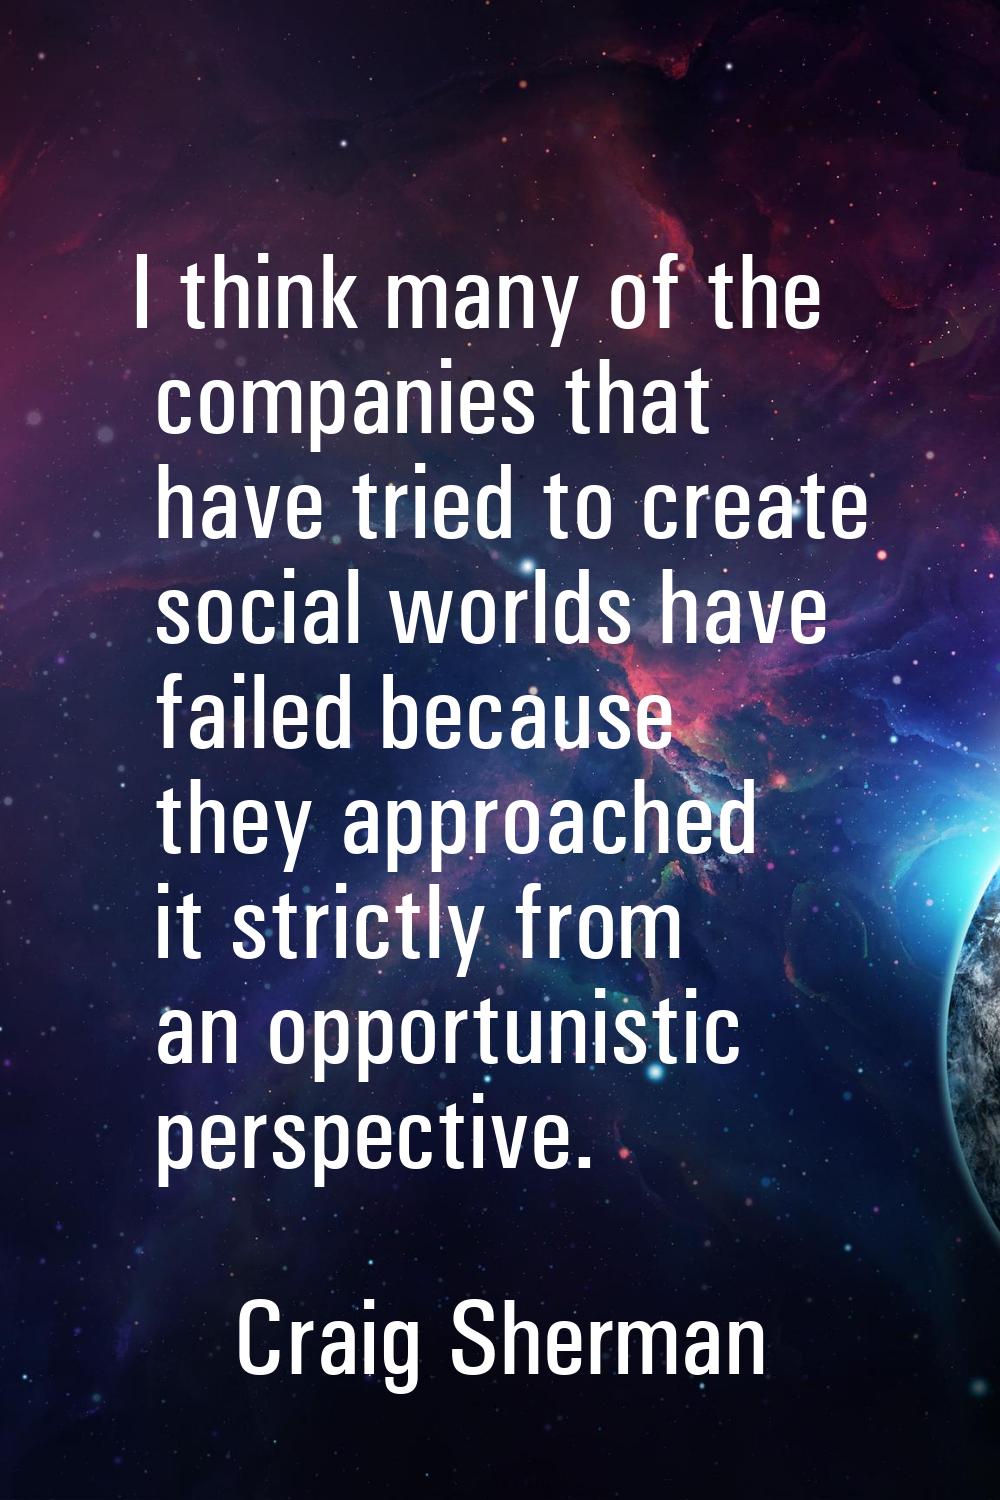 I think many of the companies that have tried to create social worlds have failed because they appr